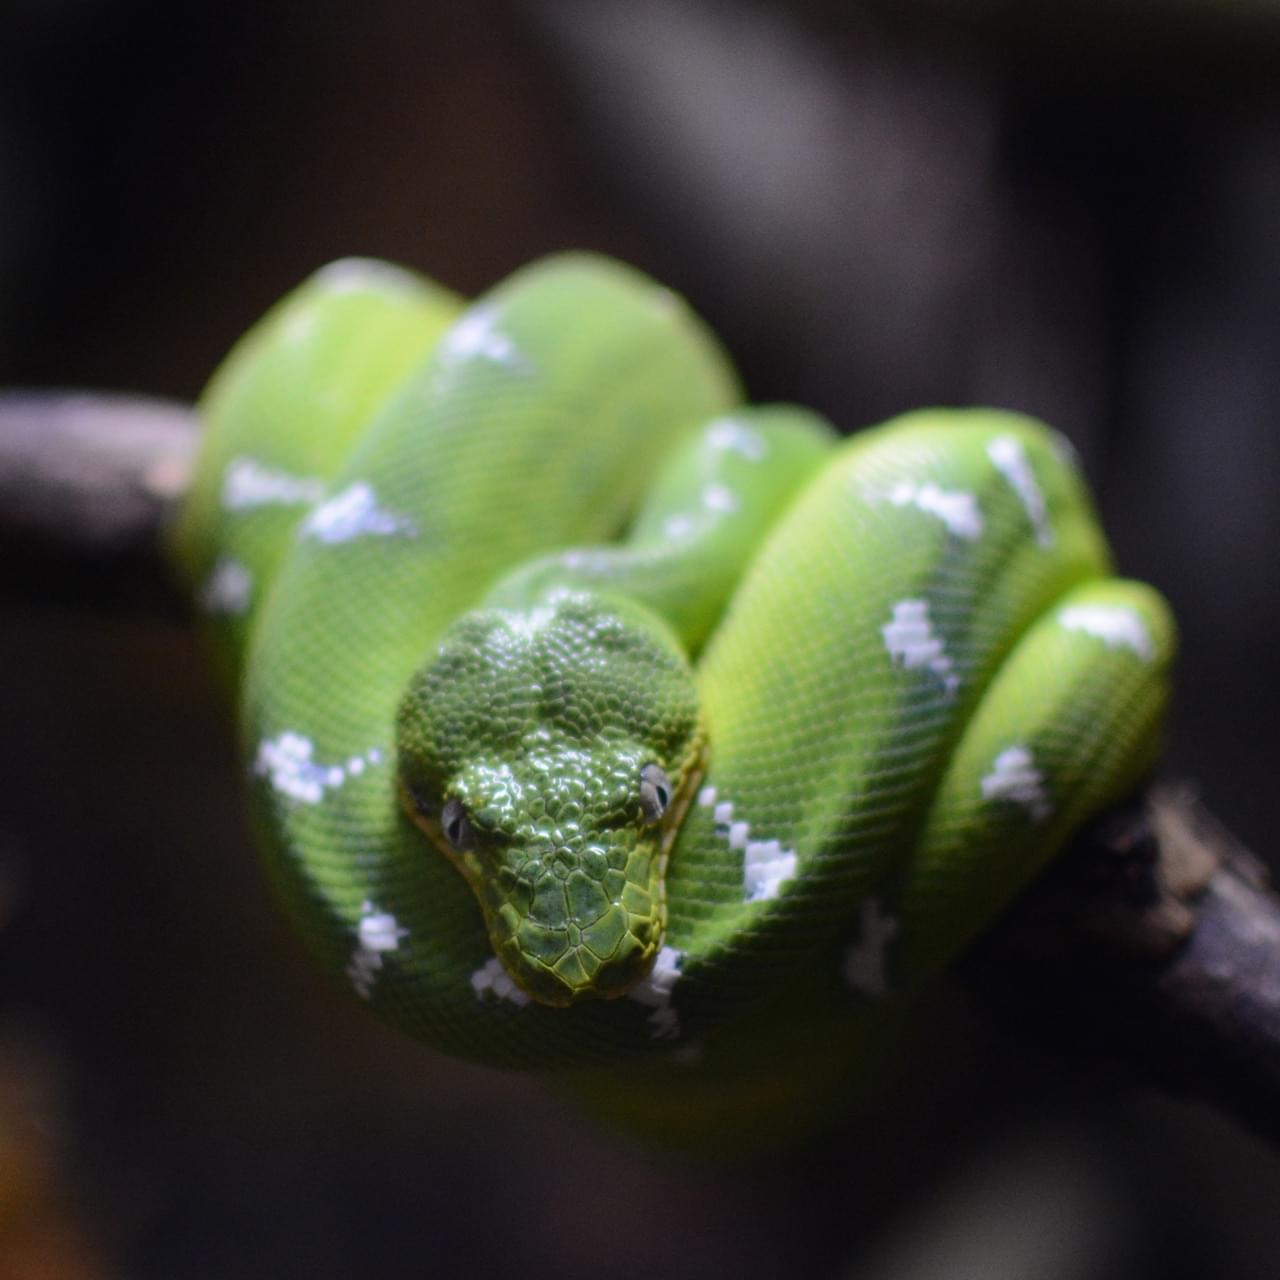 An emerald tree boa with white stripes.